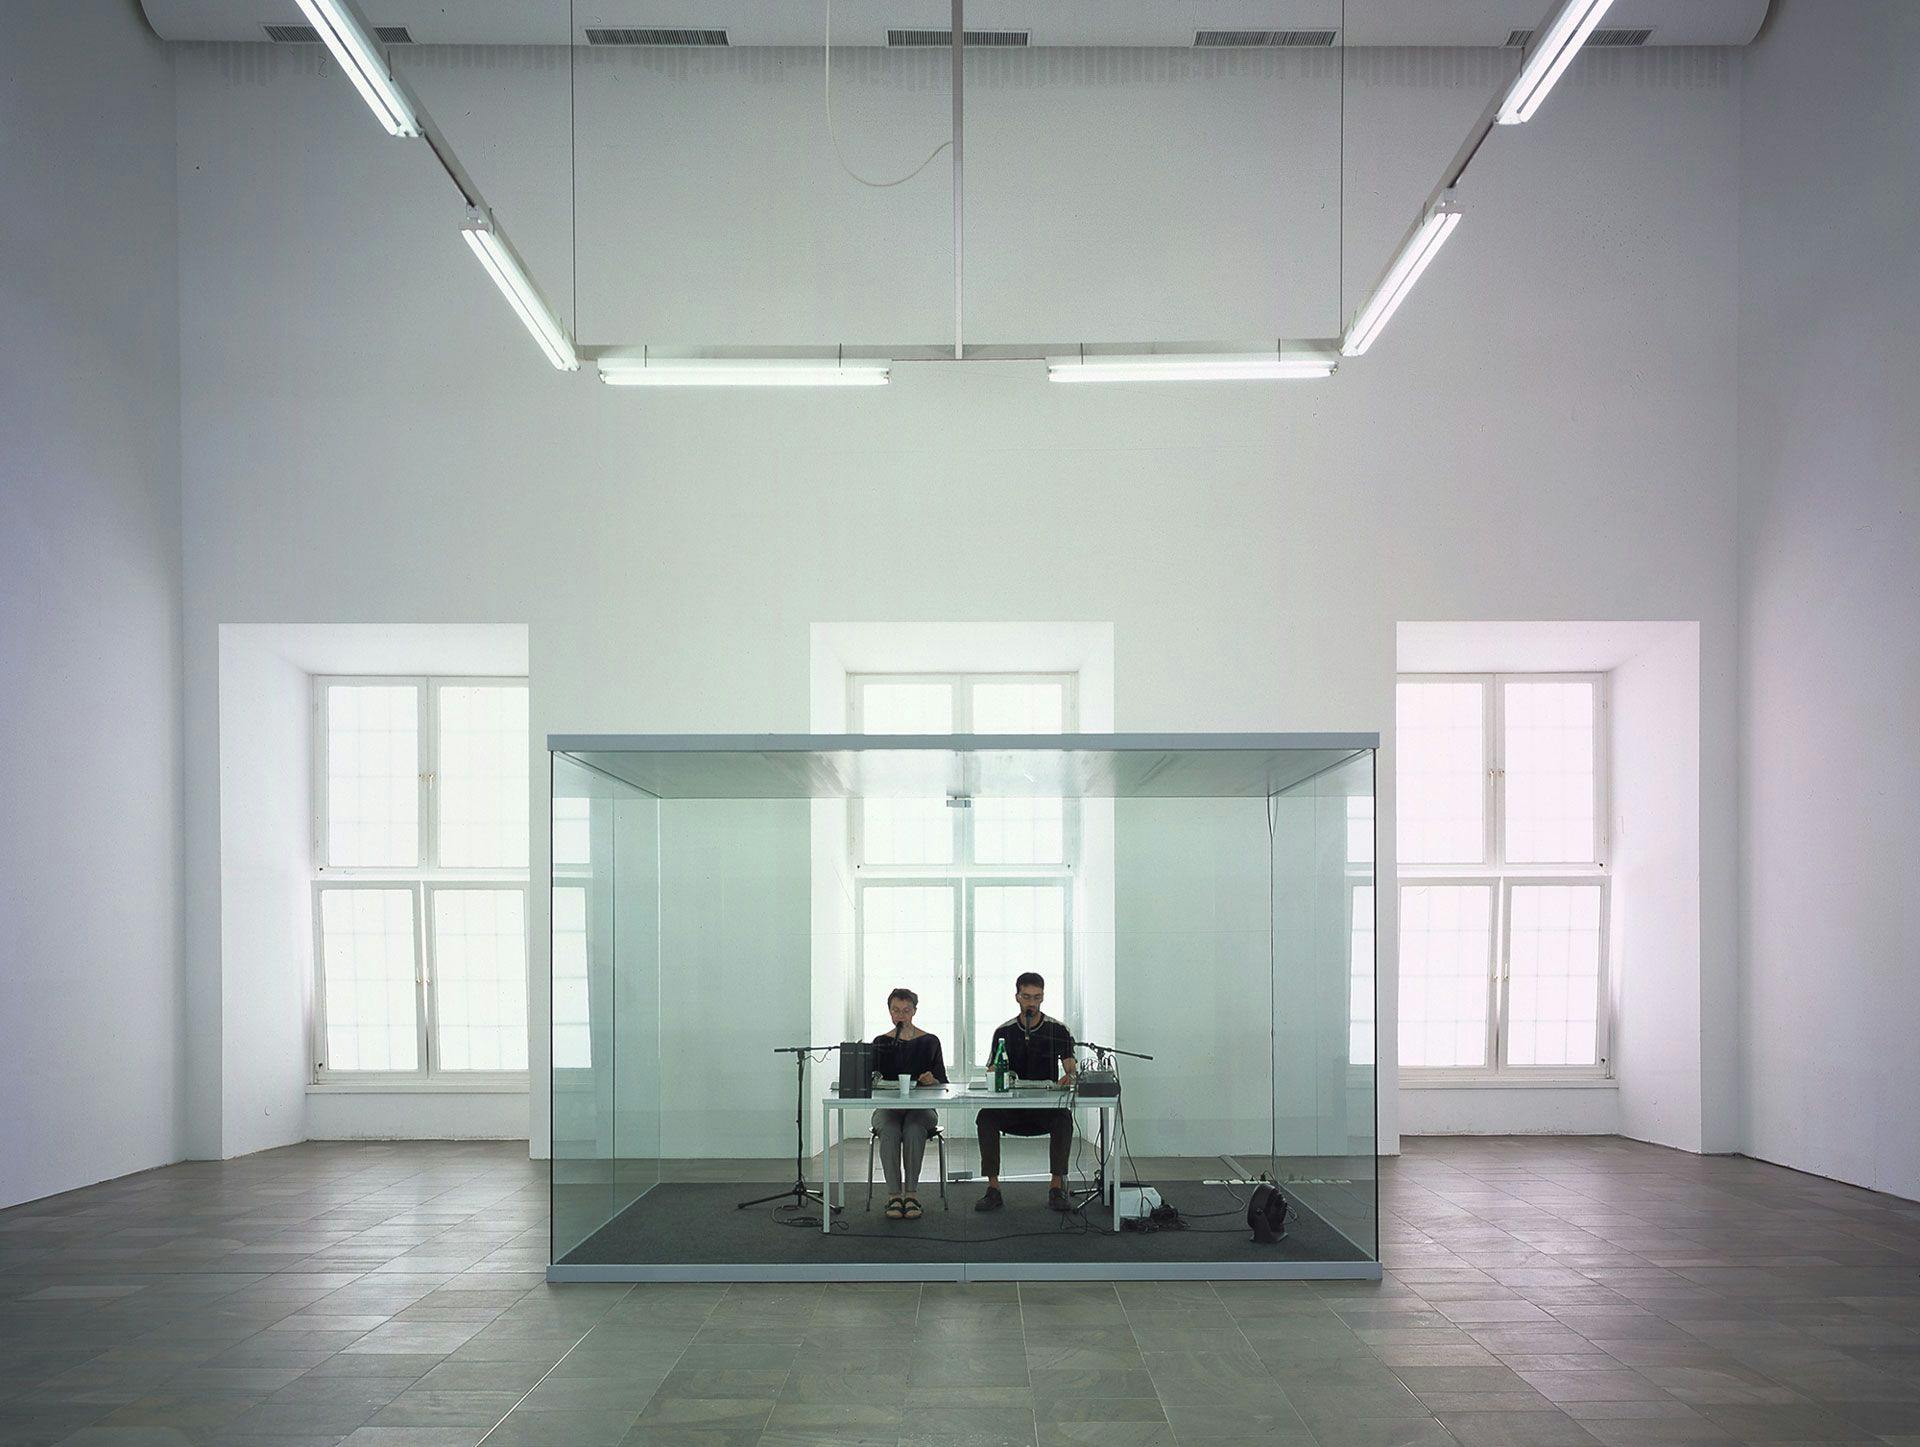 On Kawara: Reading One Million Years (Past and Future) installed at documenta 11, Kassel, Germany in 2002.